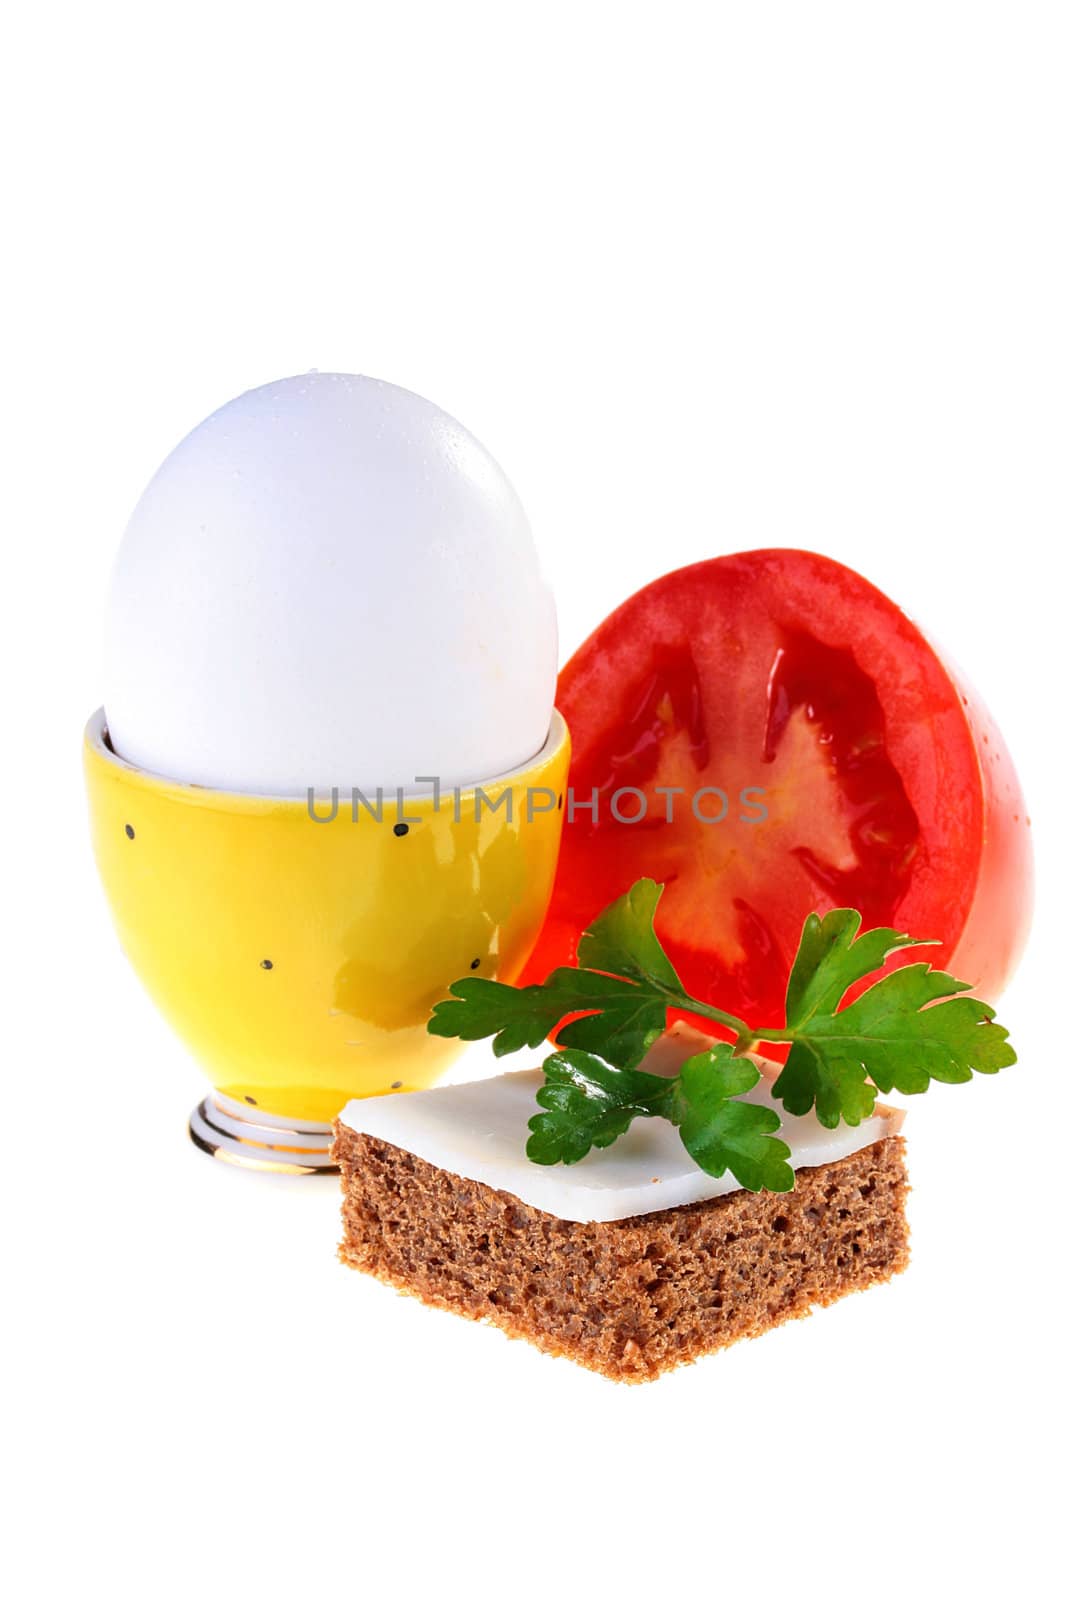 Egg in a yellow support with bread, bacon and tomato.